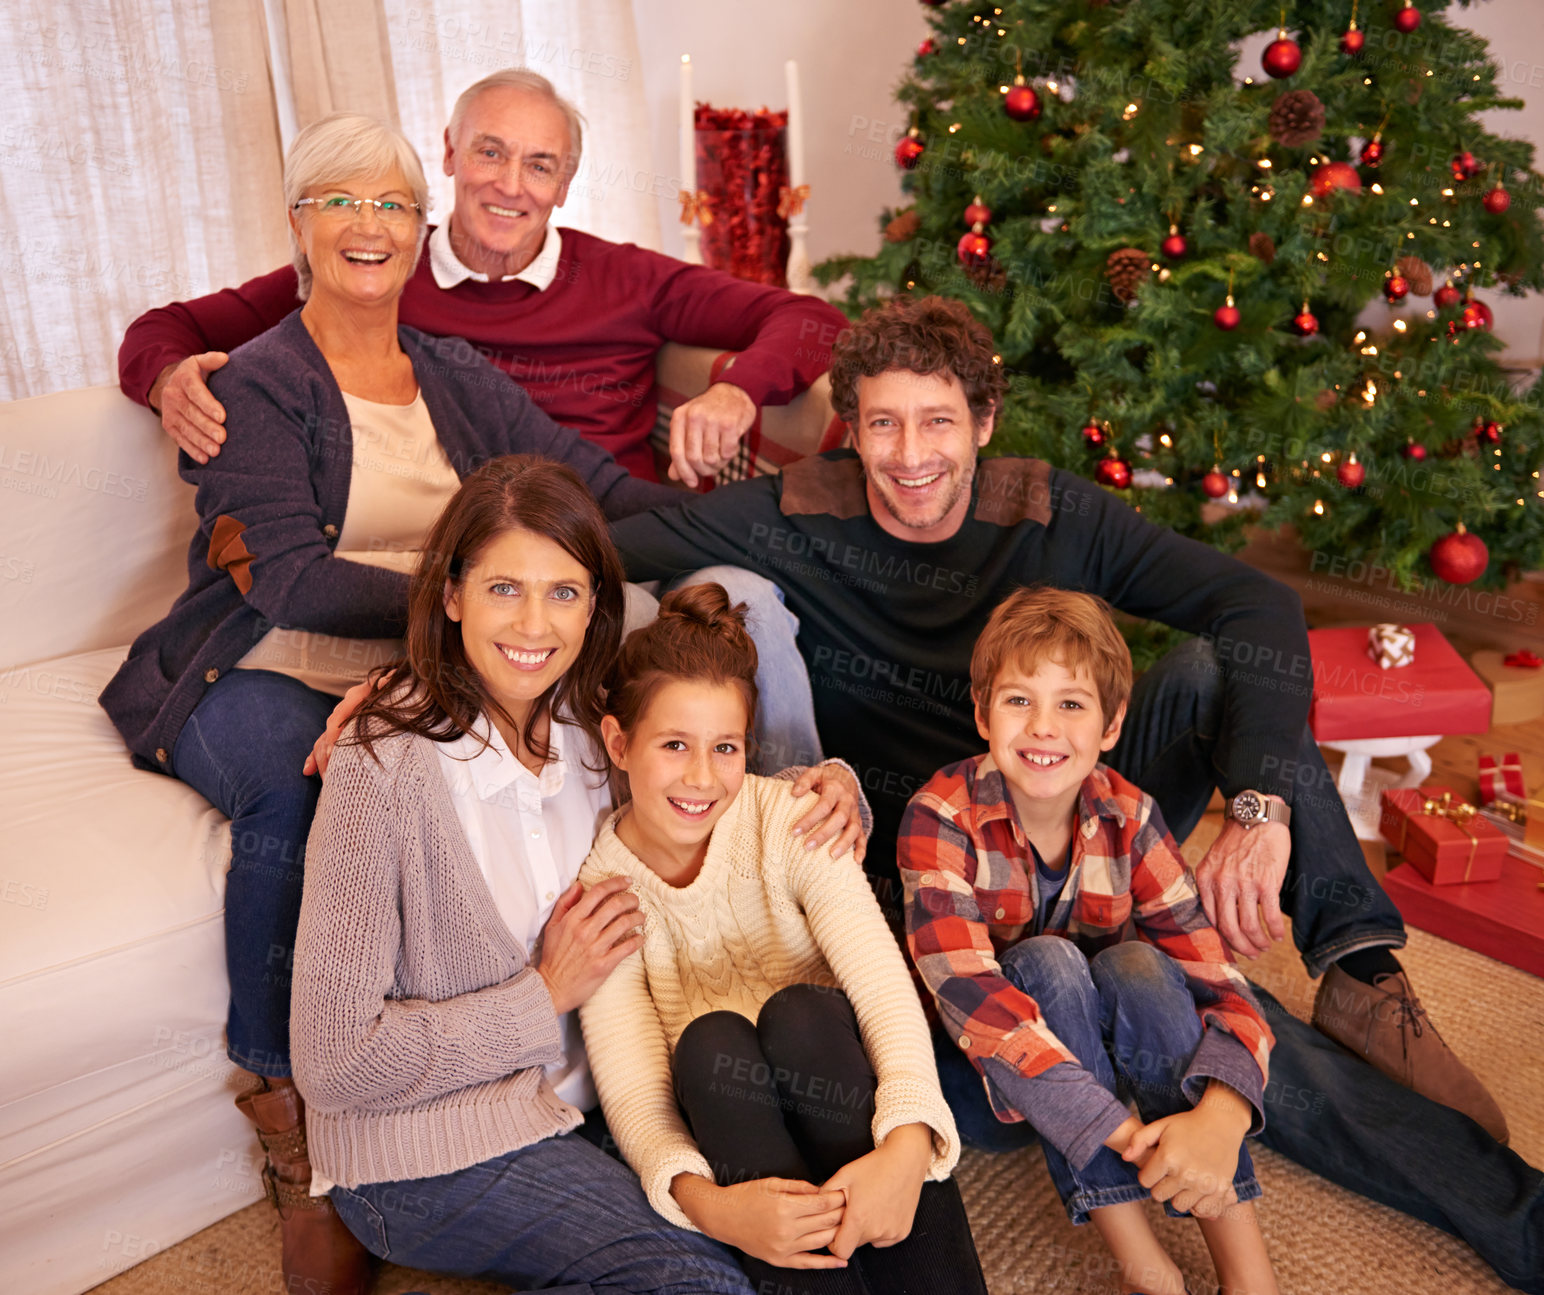 Buy stock photo Portrait of happy family at Christmas, generations on sofa in living room with Christmas tree, smile and happiness. Grandparents, couple and children on couch together at family holiday celebration.